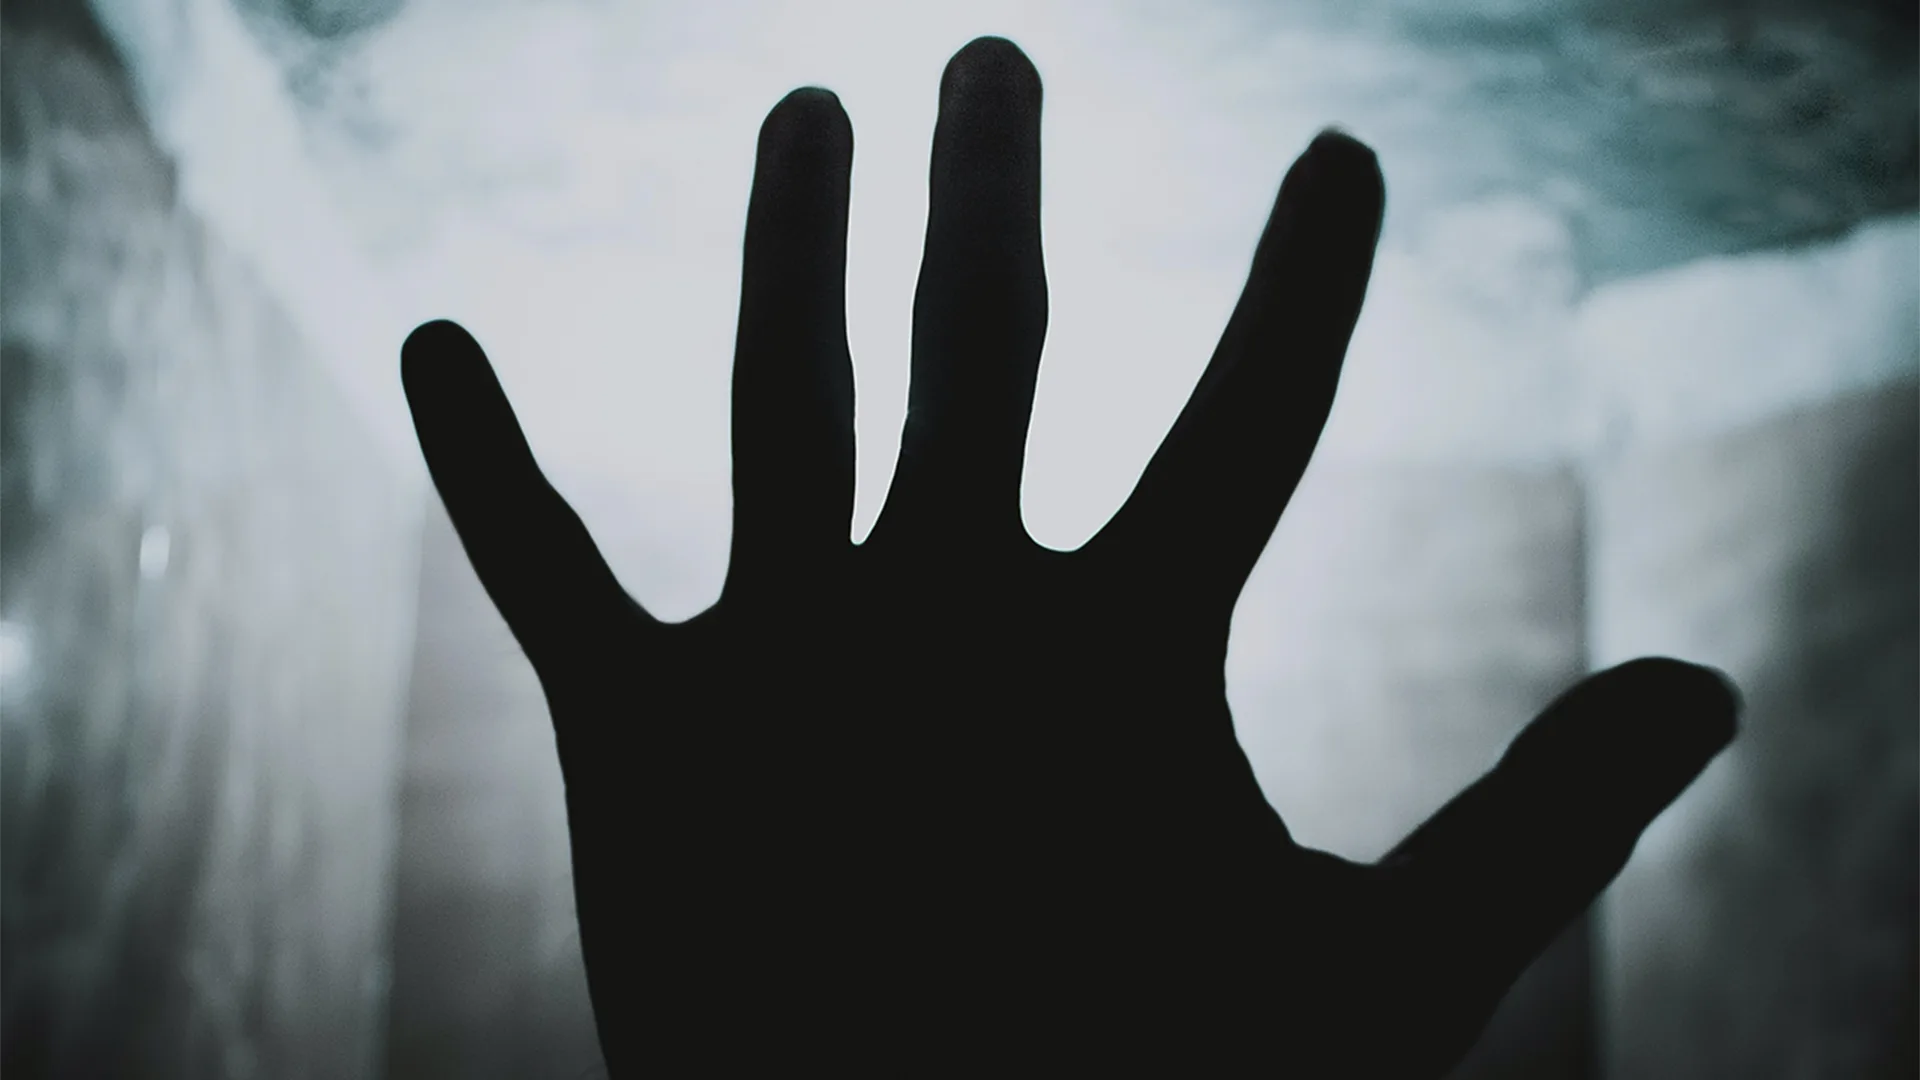 A spooky outstretched hand